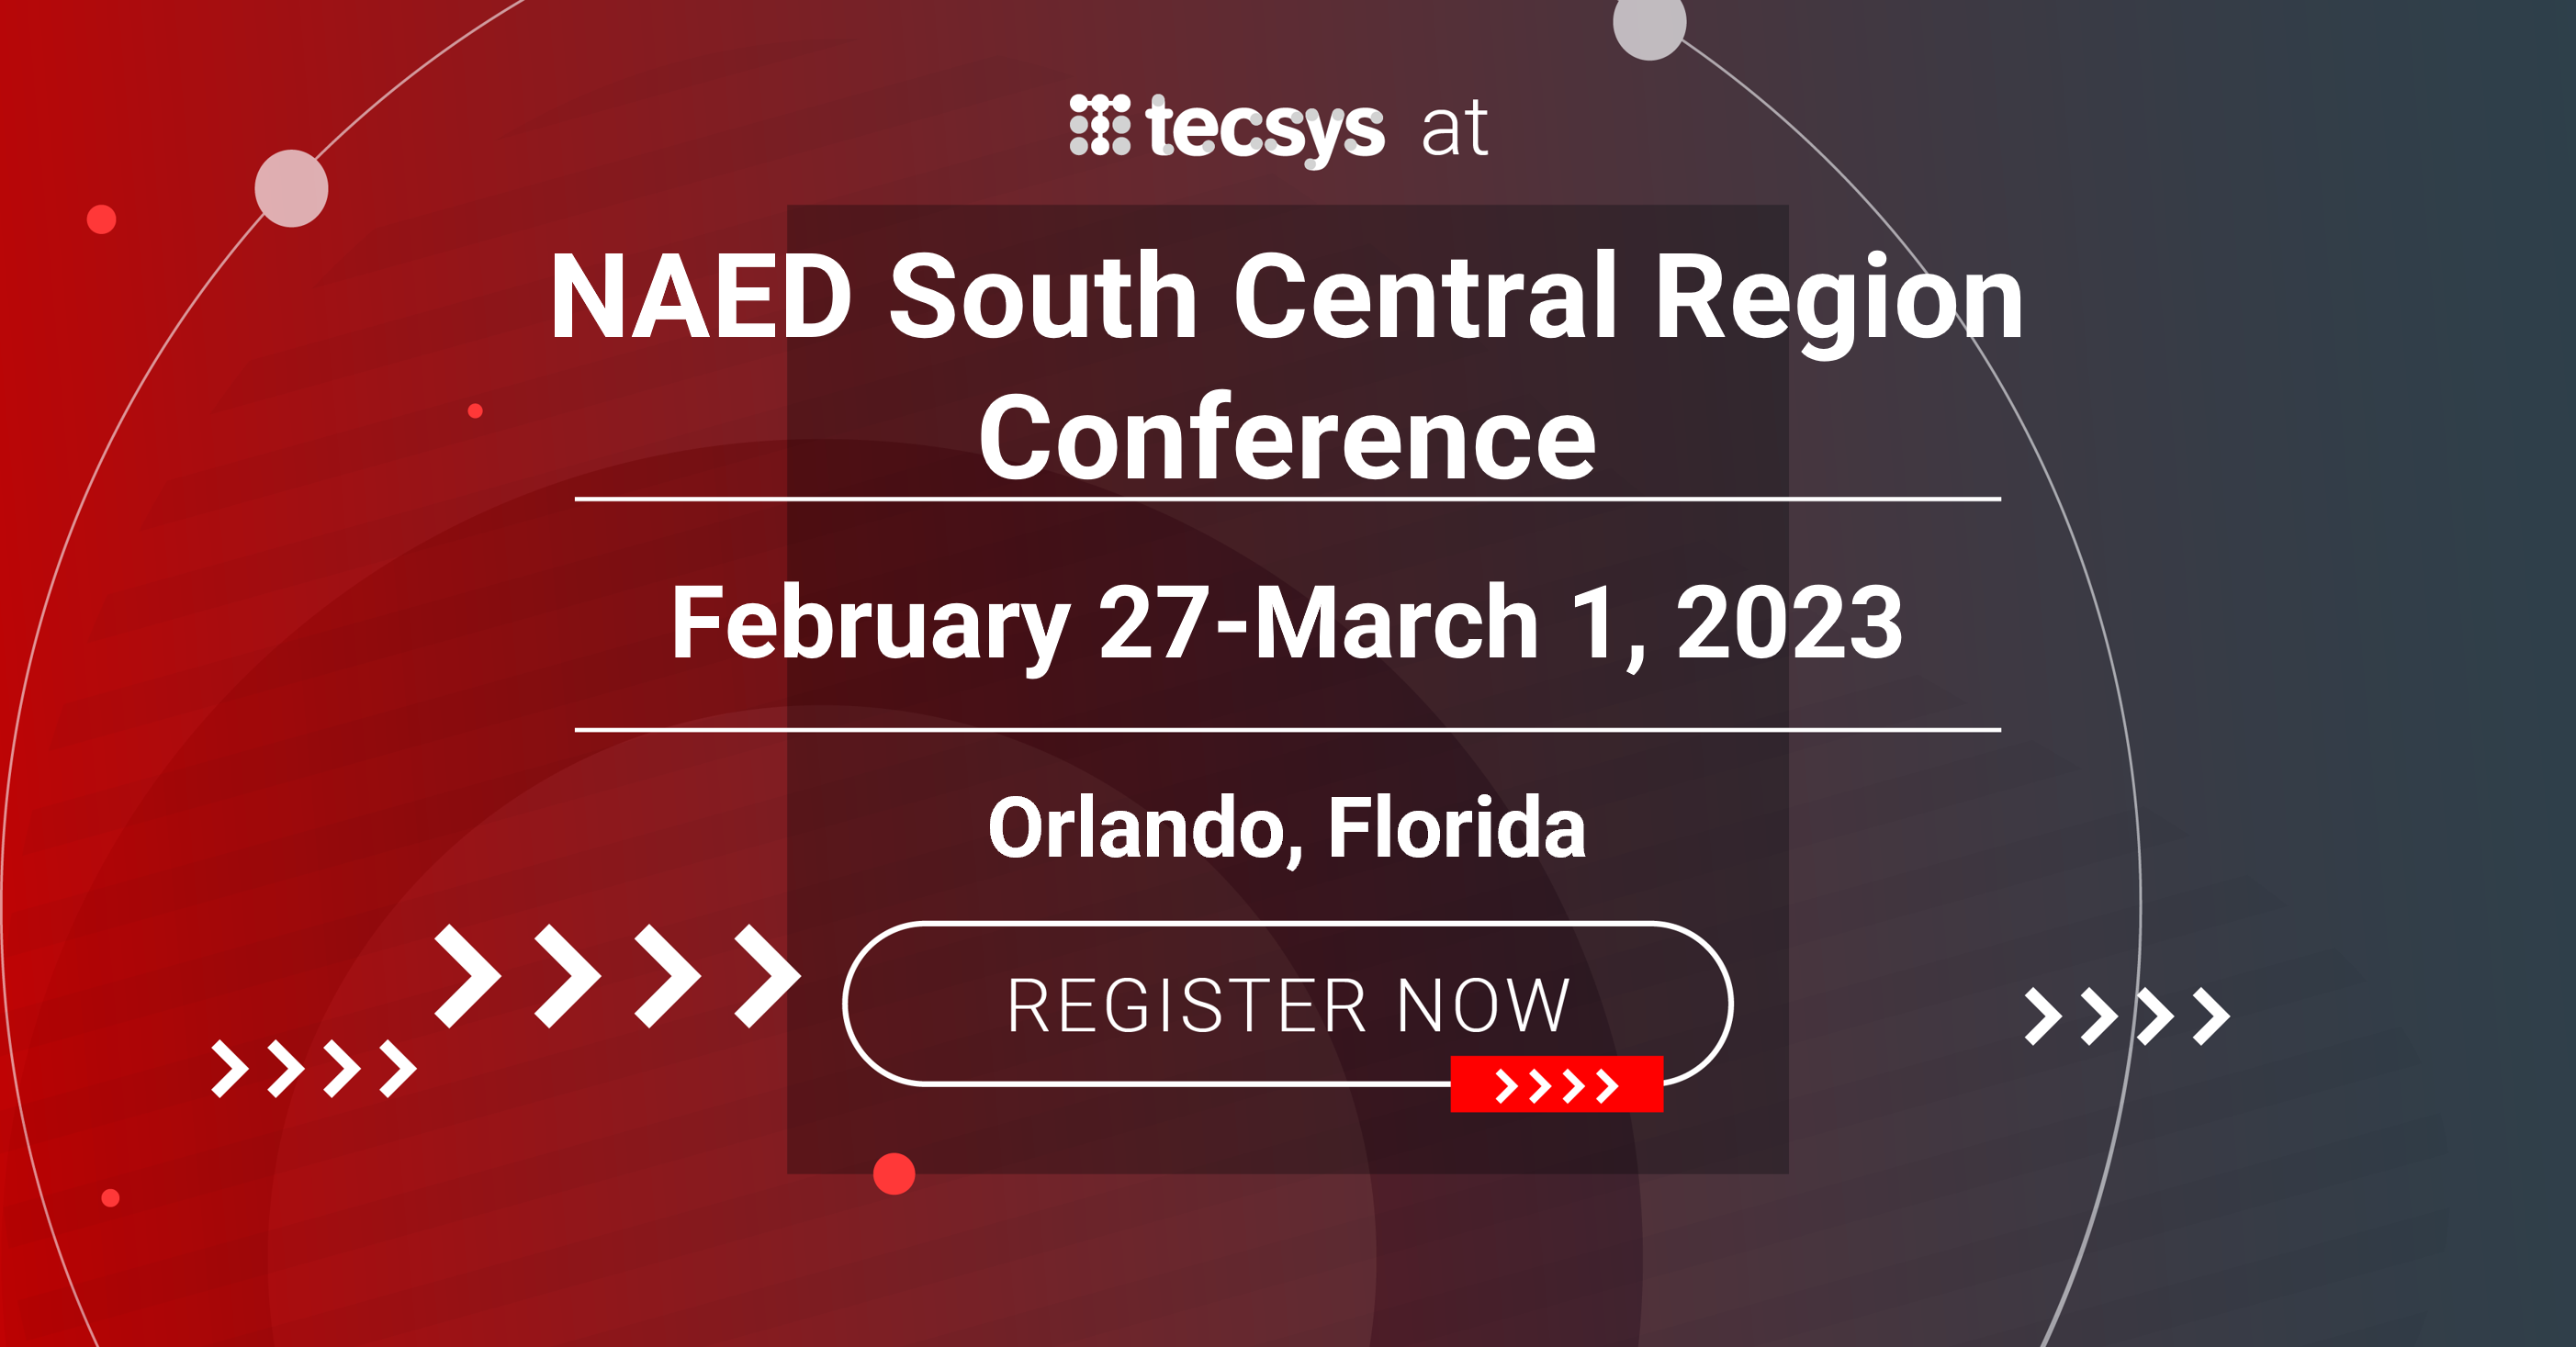 NAED 2023 SOUTH CENTRAL REGION CONFERENCE Tecsys